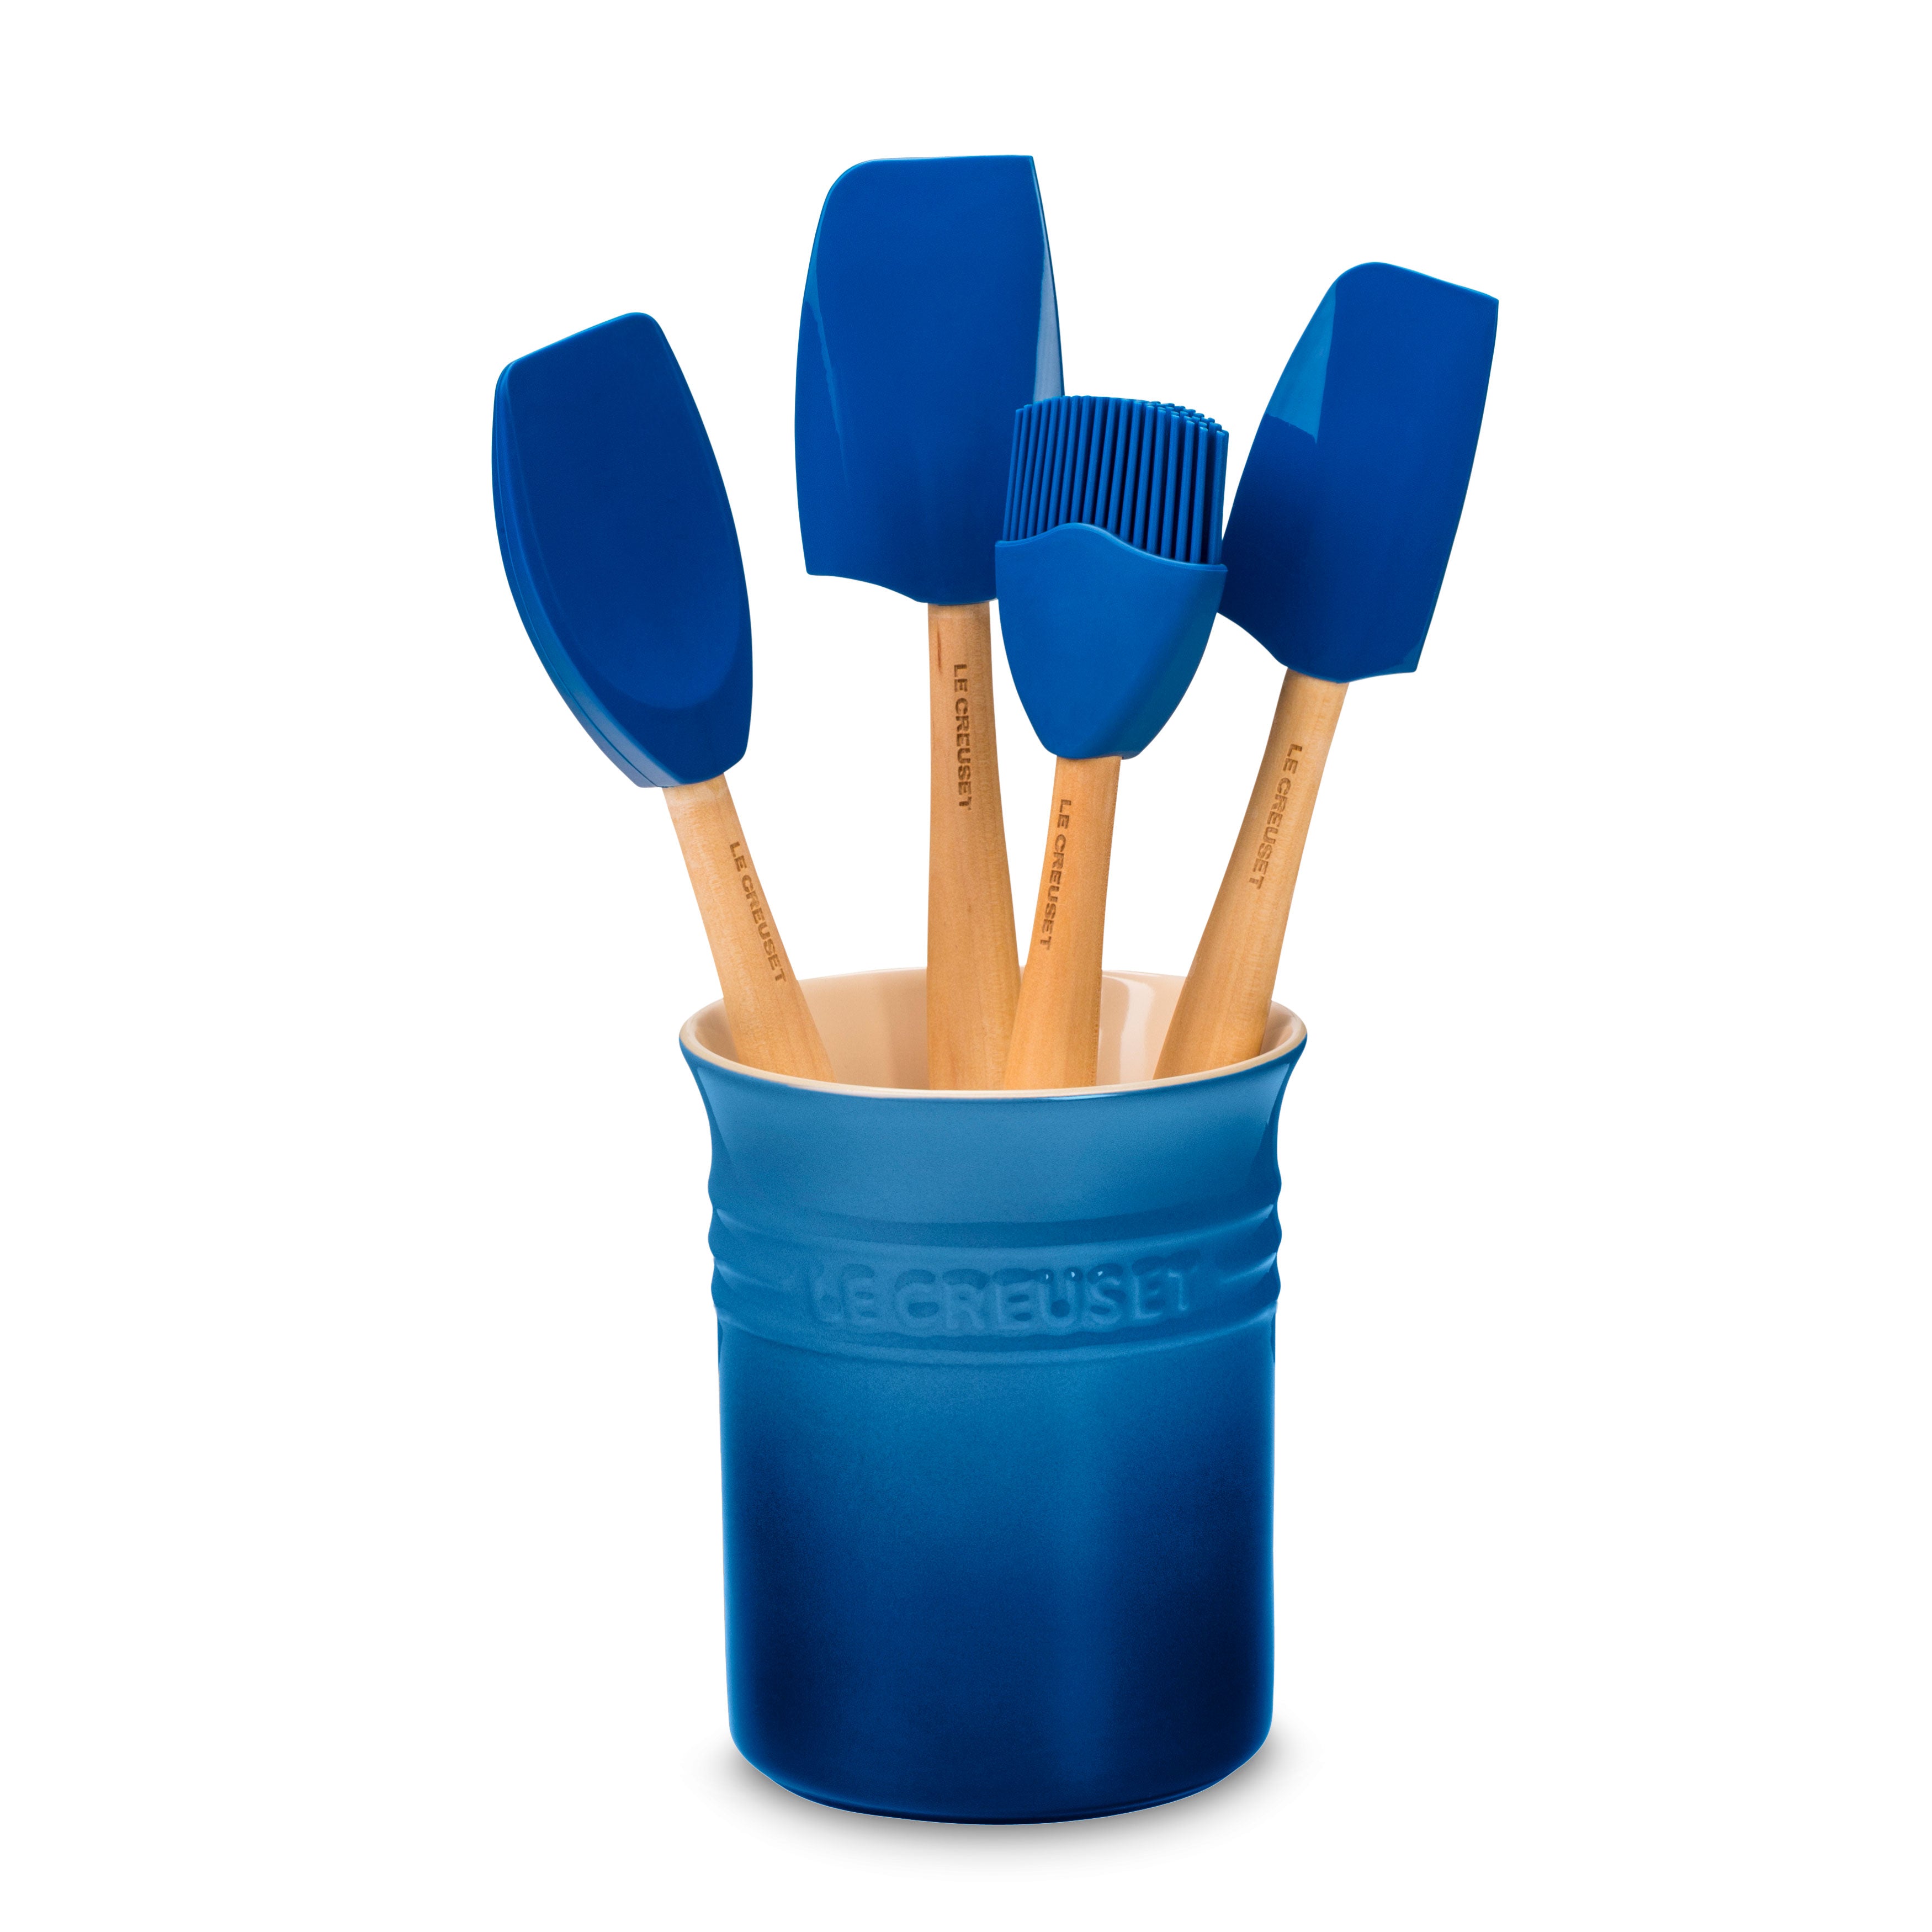 Le Creuset - SILICONE HANDLE GRIPS, SET OF 2 - Marseille